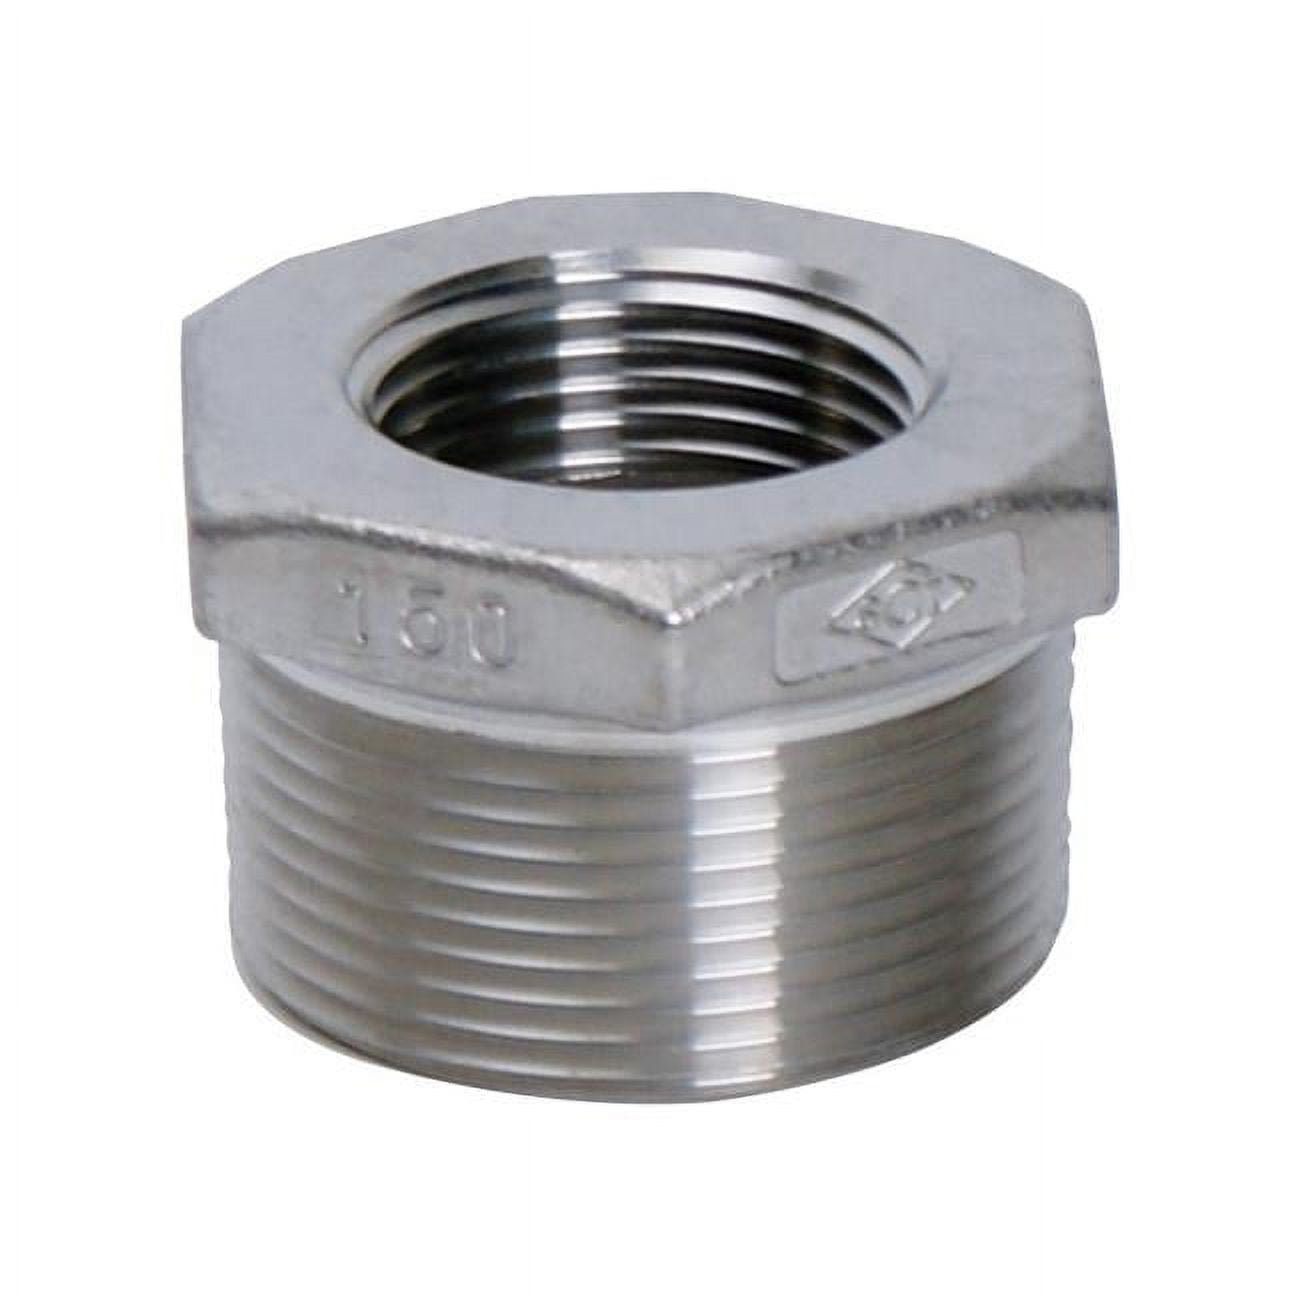 4809943 1.25 In. Thead X 1 In. Dia. Thead Stainless Steel Hex Bushing